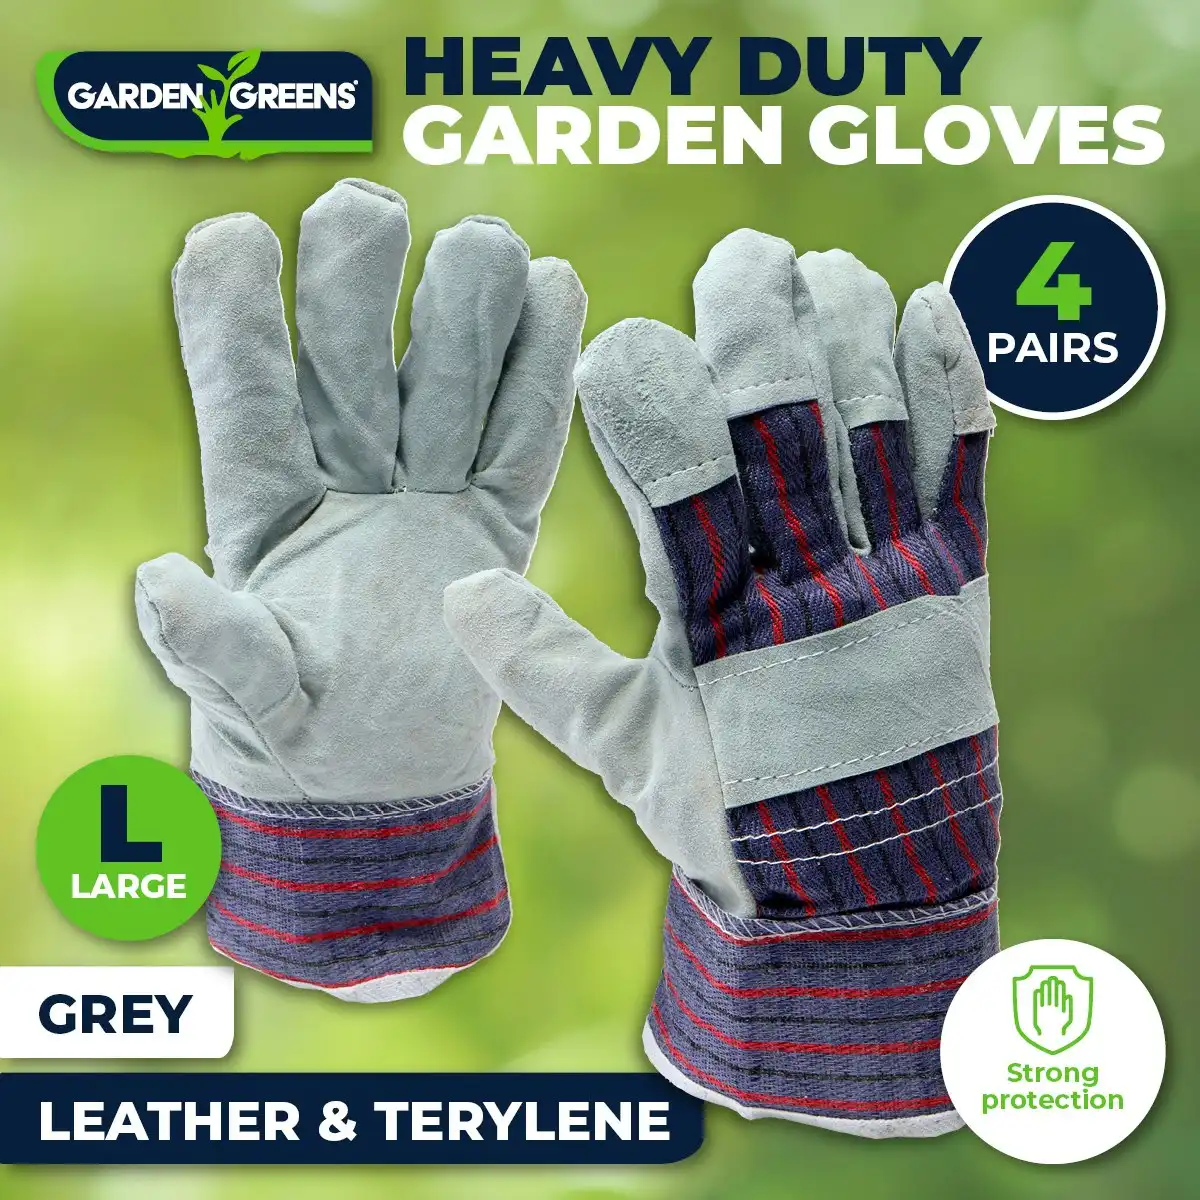 Garden Greens 4 Pairs Garden Gloves Grey Durable Leather Comfortable Adult Size